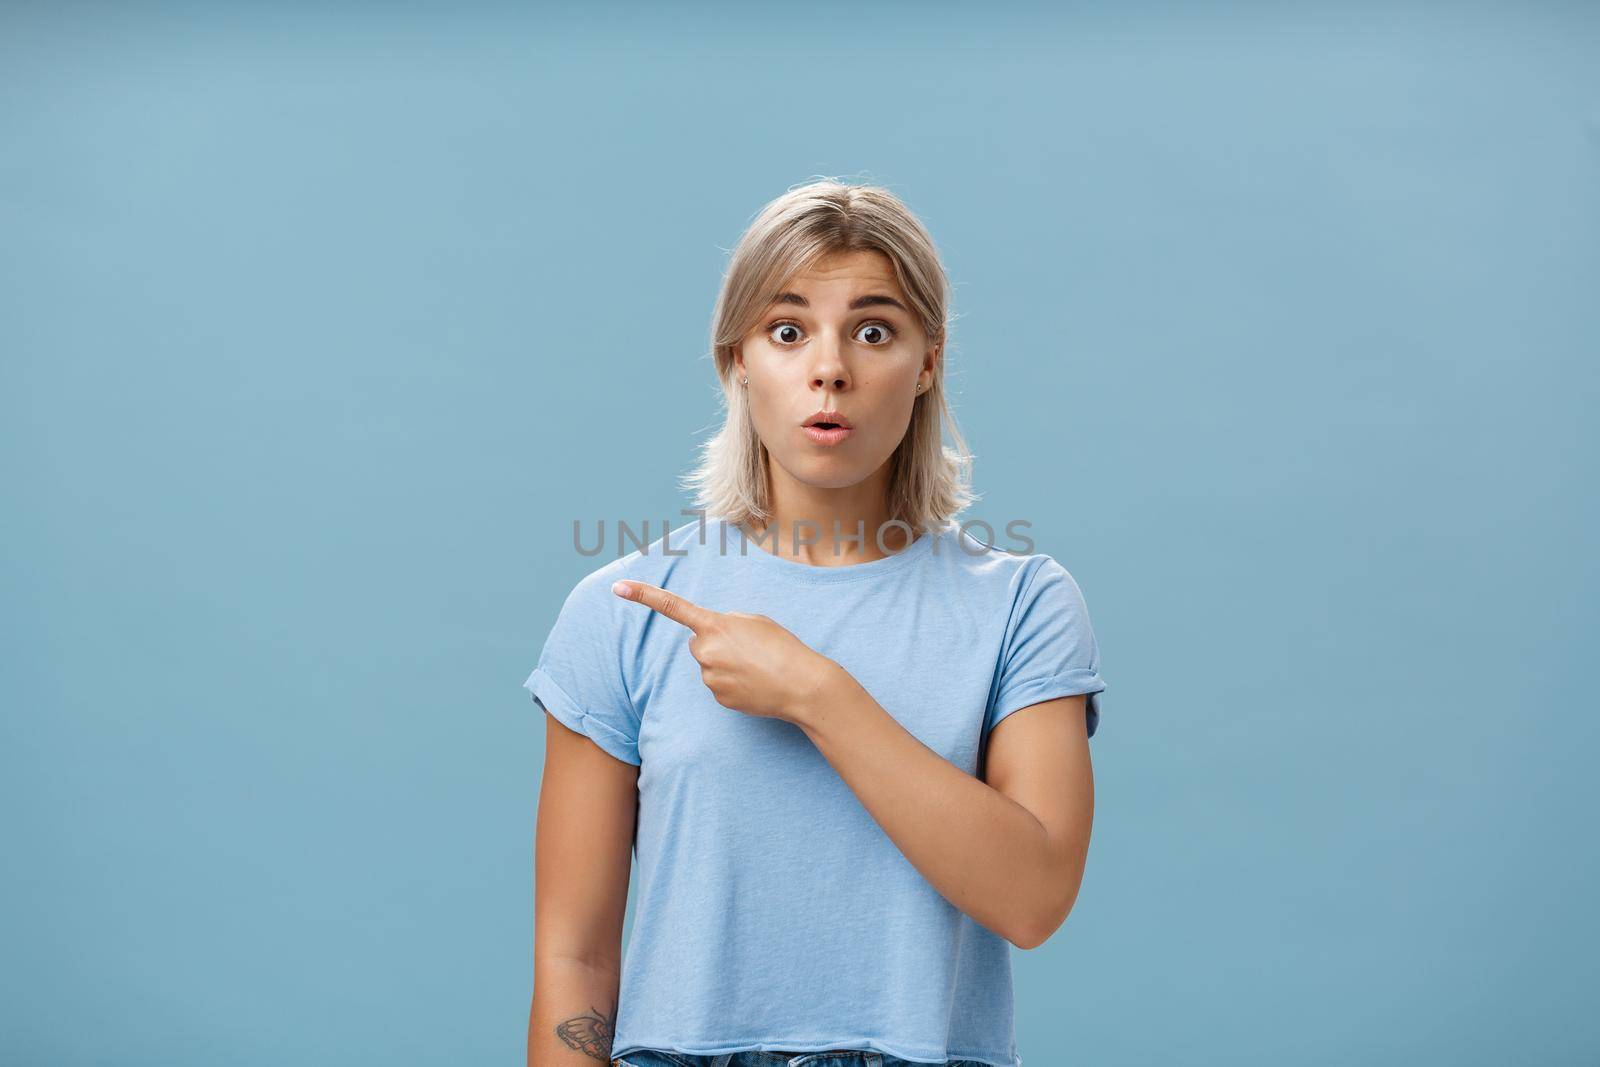 Studio shot of amazed stunned cute blonde witnessing unbelievable event gasping opening mouth staring astonished and pointing left being questioned and shocked over blue background. Emotions concept